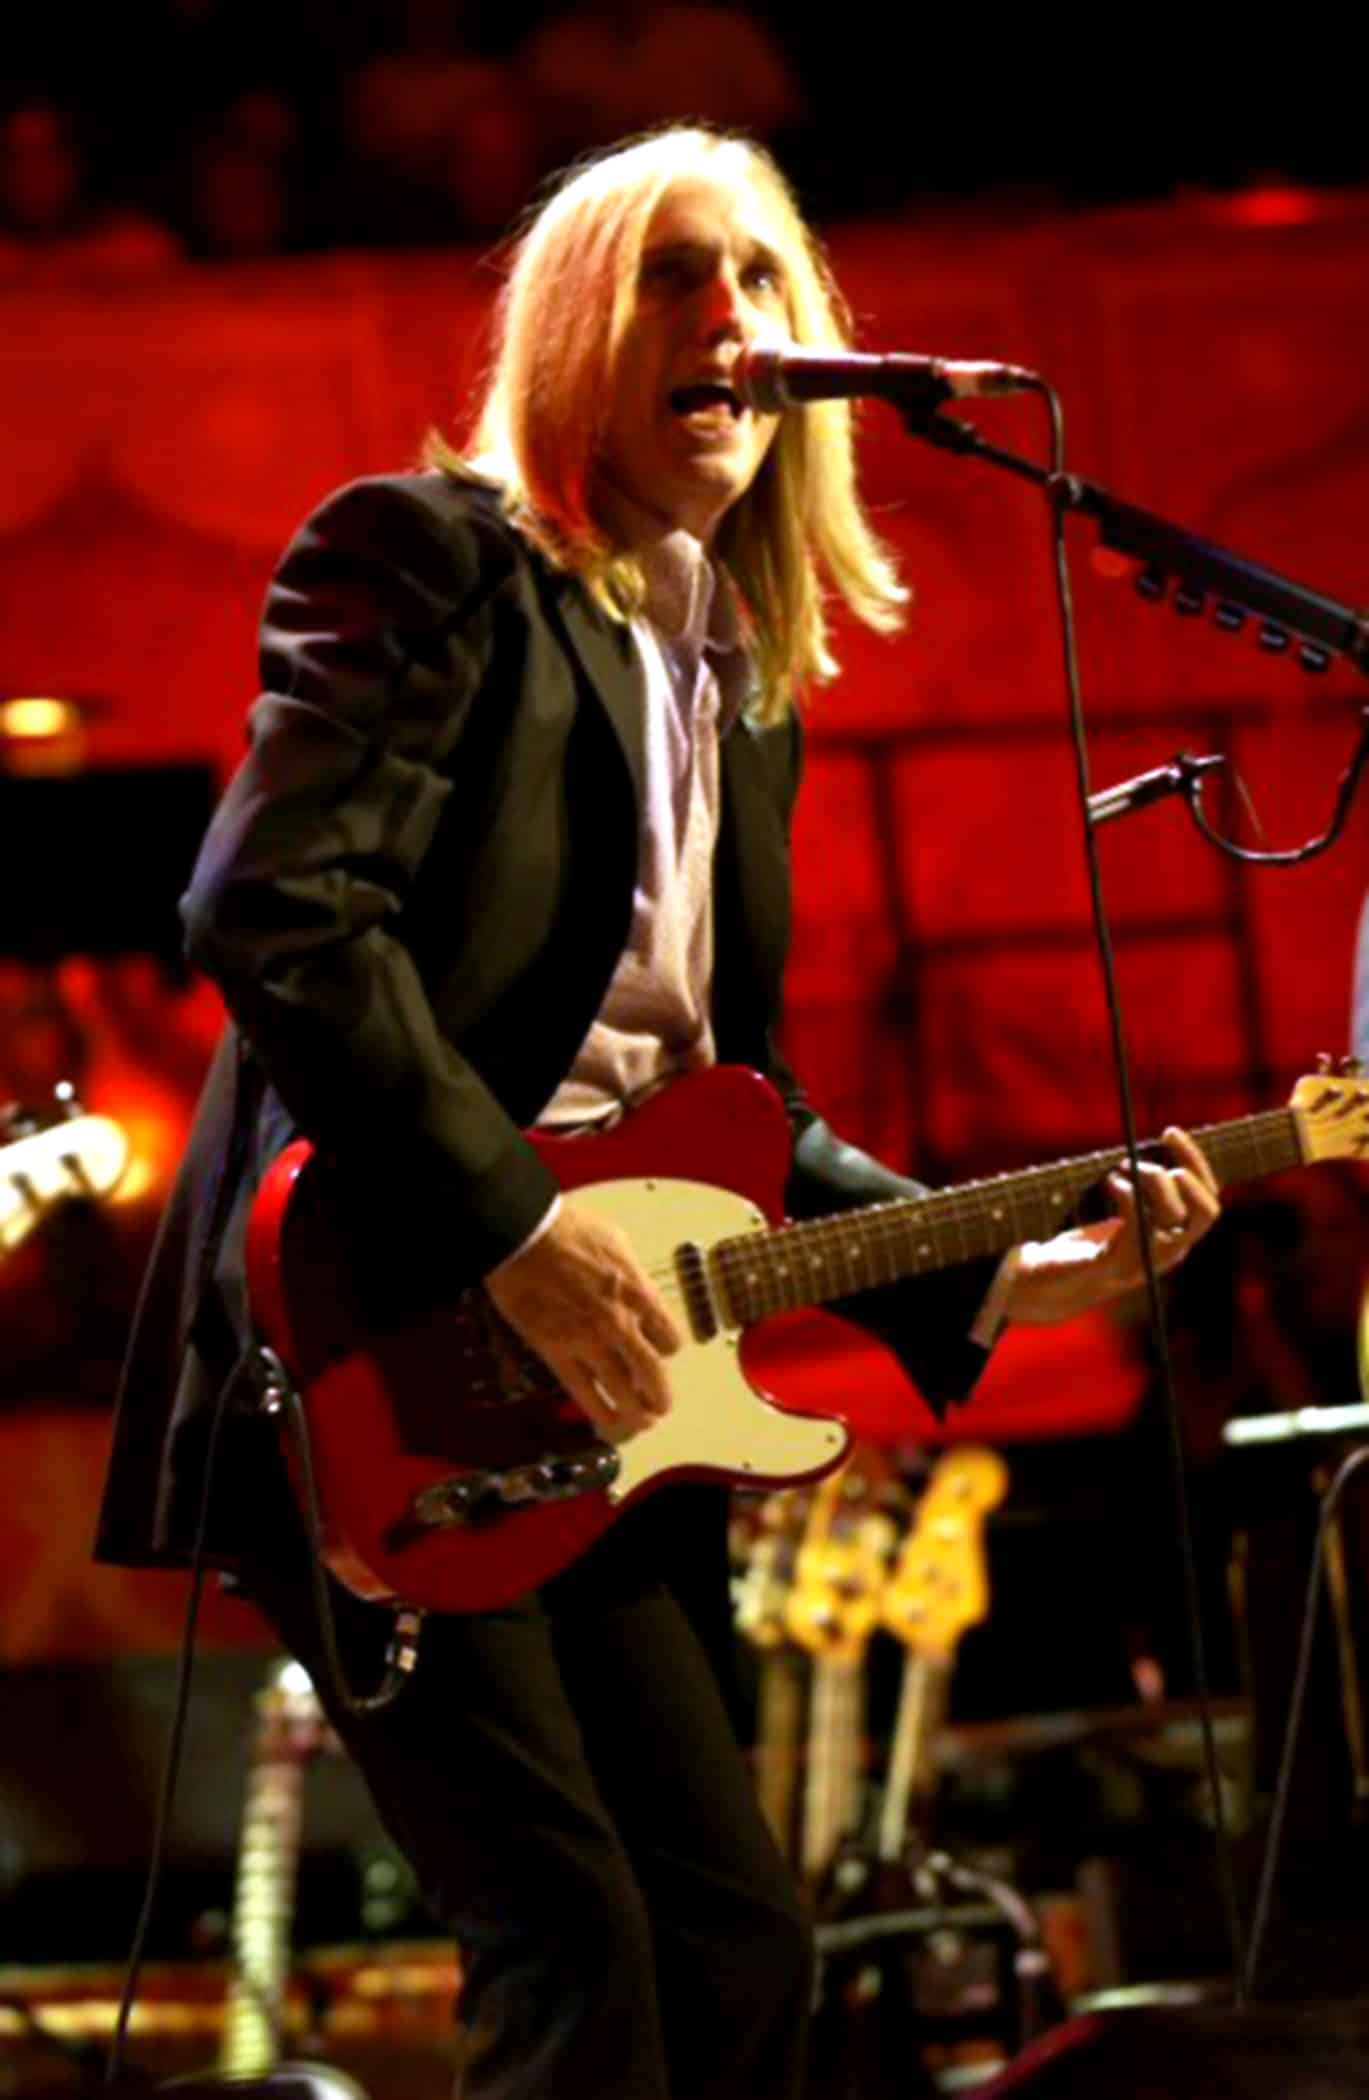 CONCERT FOR GEORGE, Tom Petty, 2003